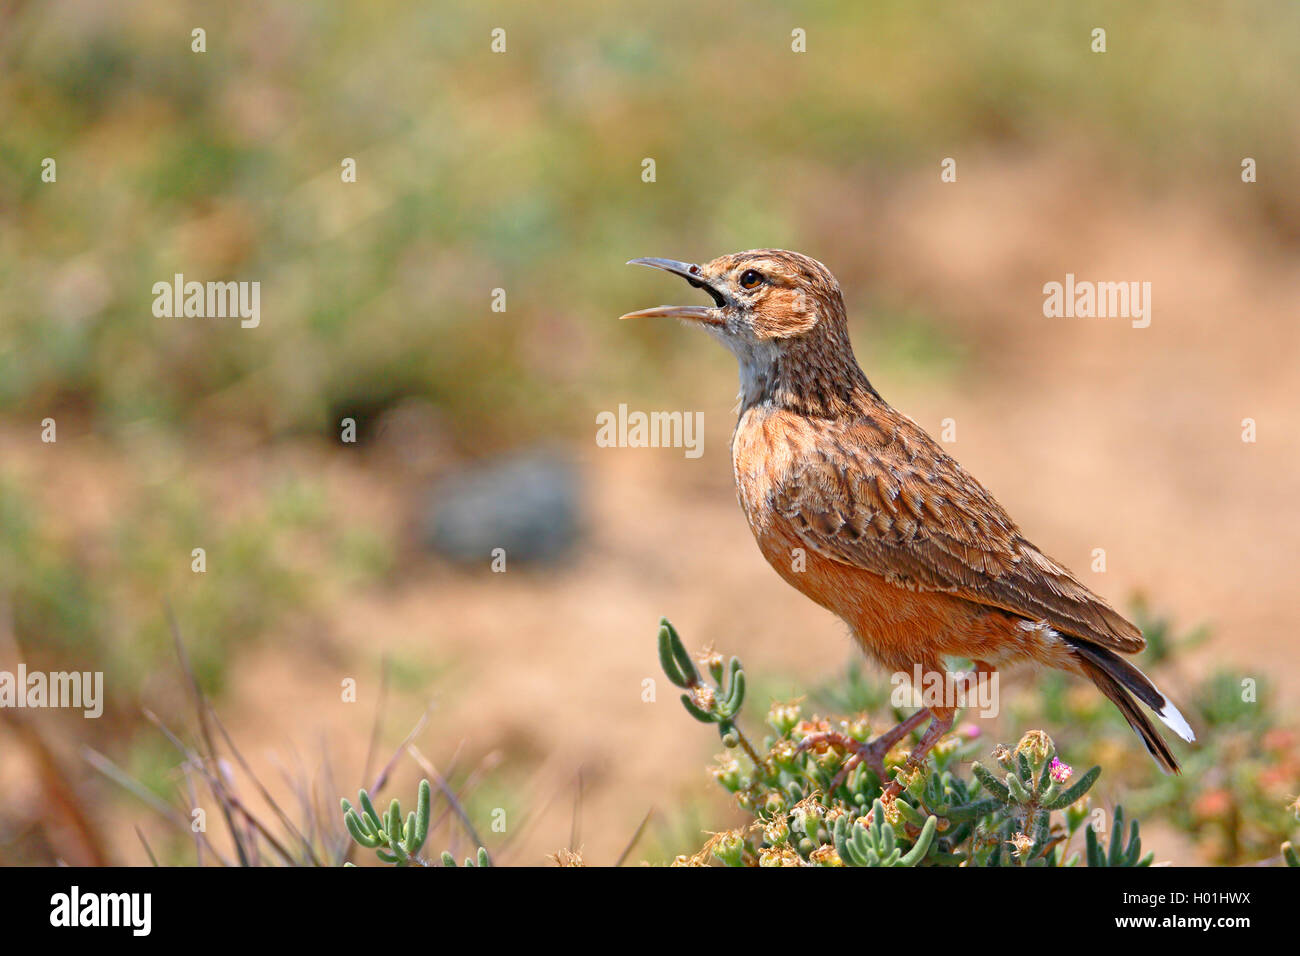 Spike-heeled lark (Chersomanes albofasciata), sits on a plant and calls, South Africa, Eastern Cape, Camdeboo National Park Stock Photo